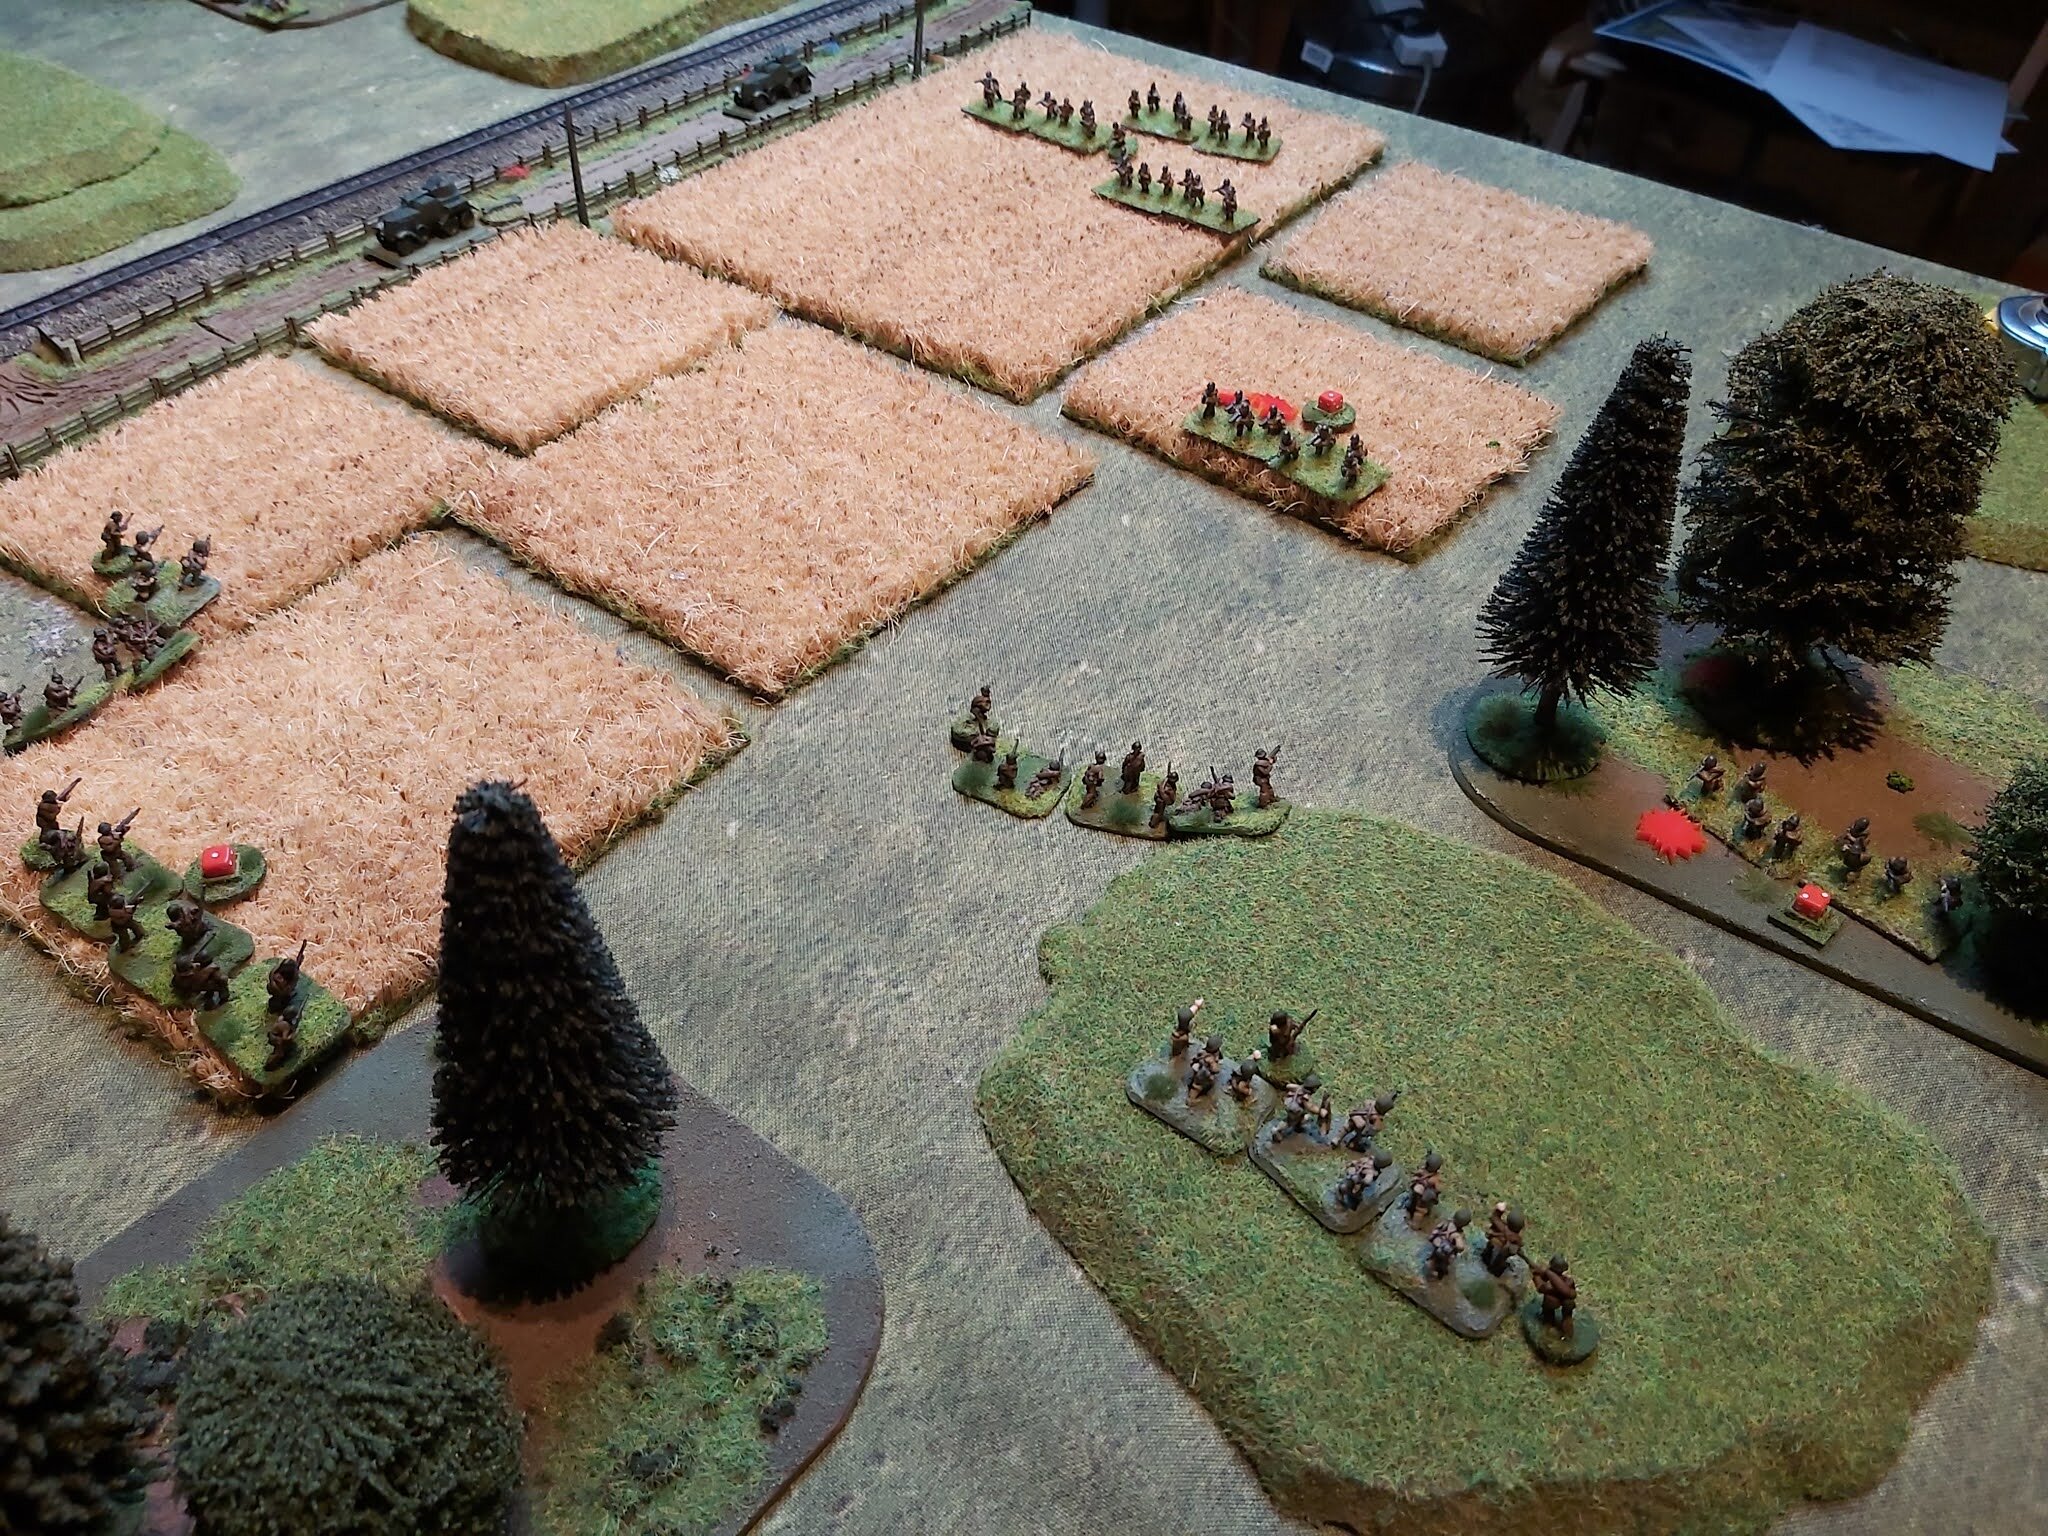 Pushing forward the rest of the platoon, the Romanians attempted to flank the Soviets but ran into men in the woods.